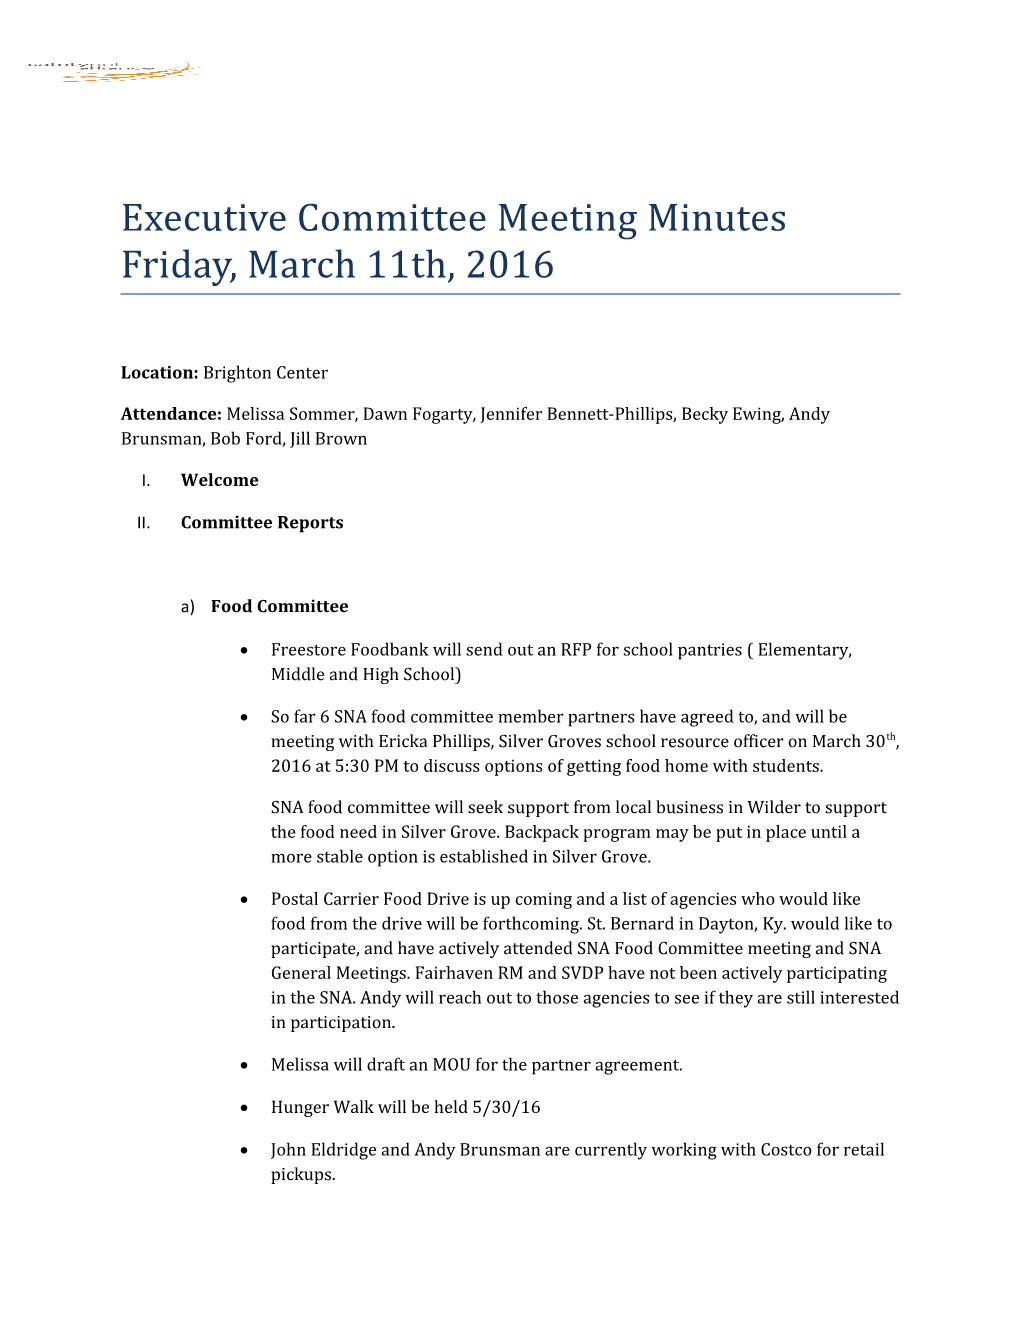 Executive Committee Meeting Minutes Friday, March 11Th, 2016